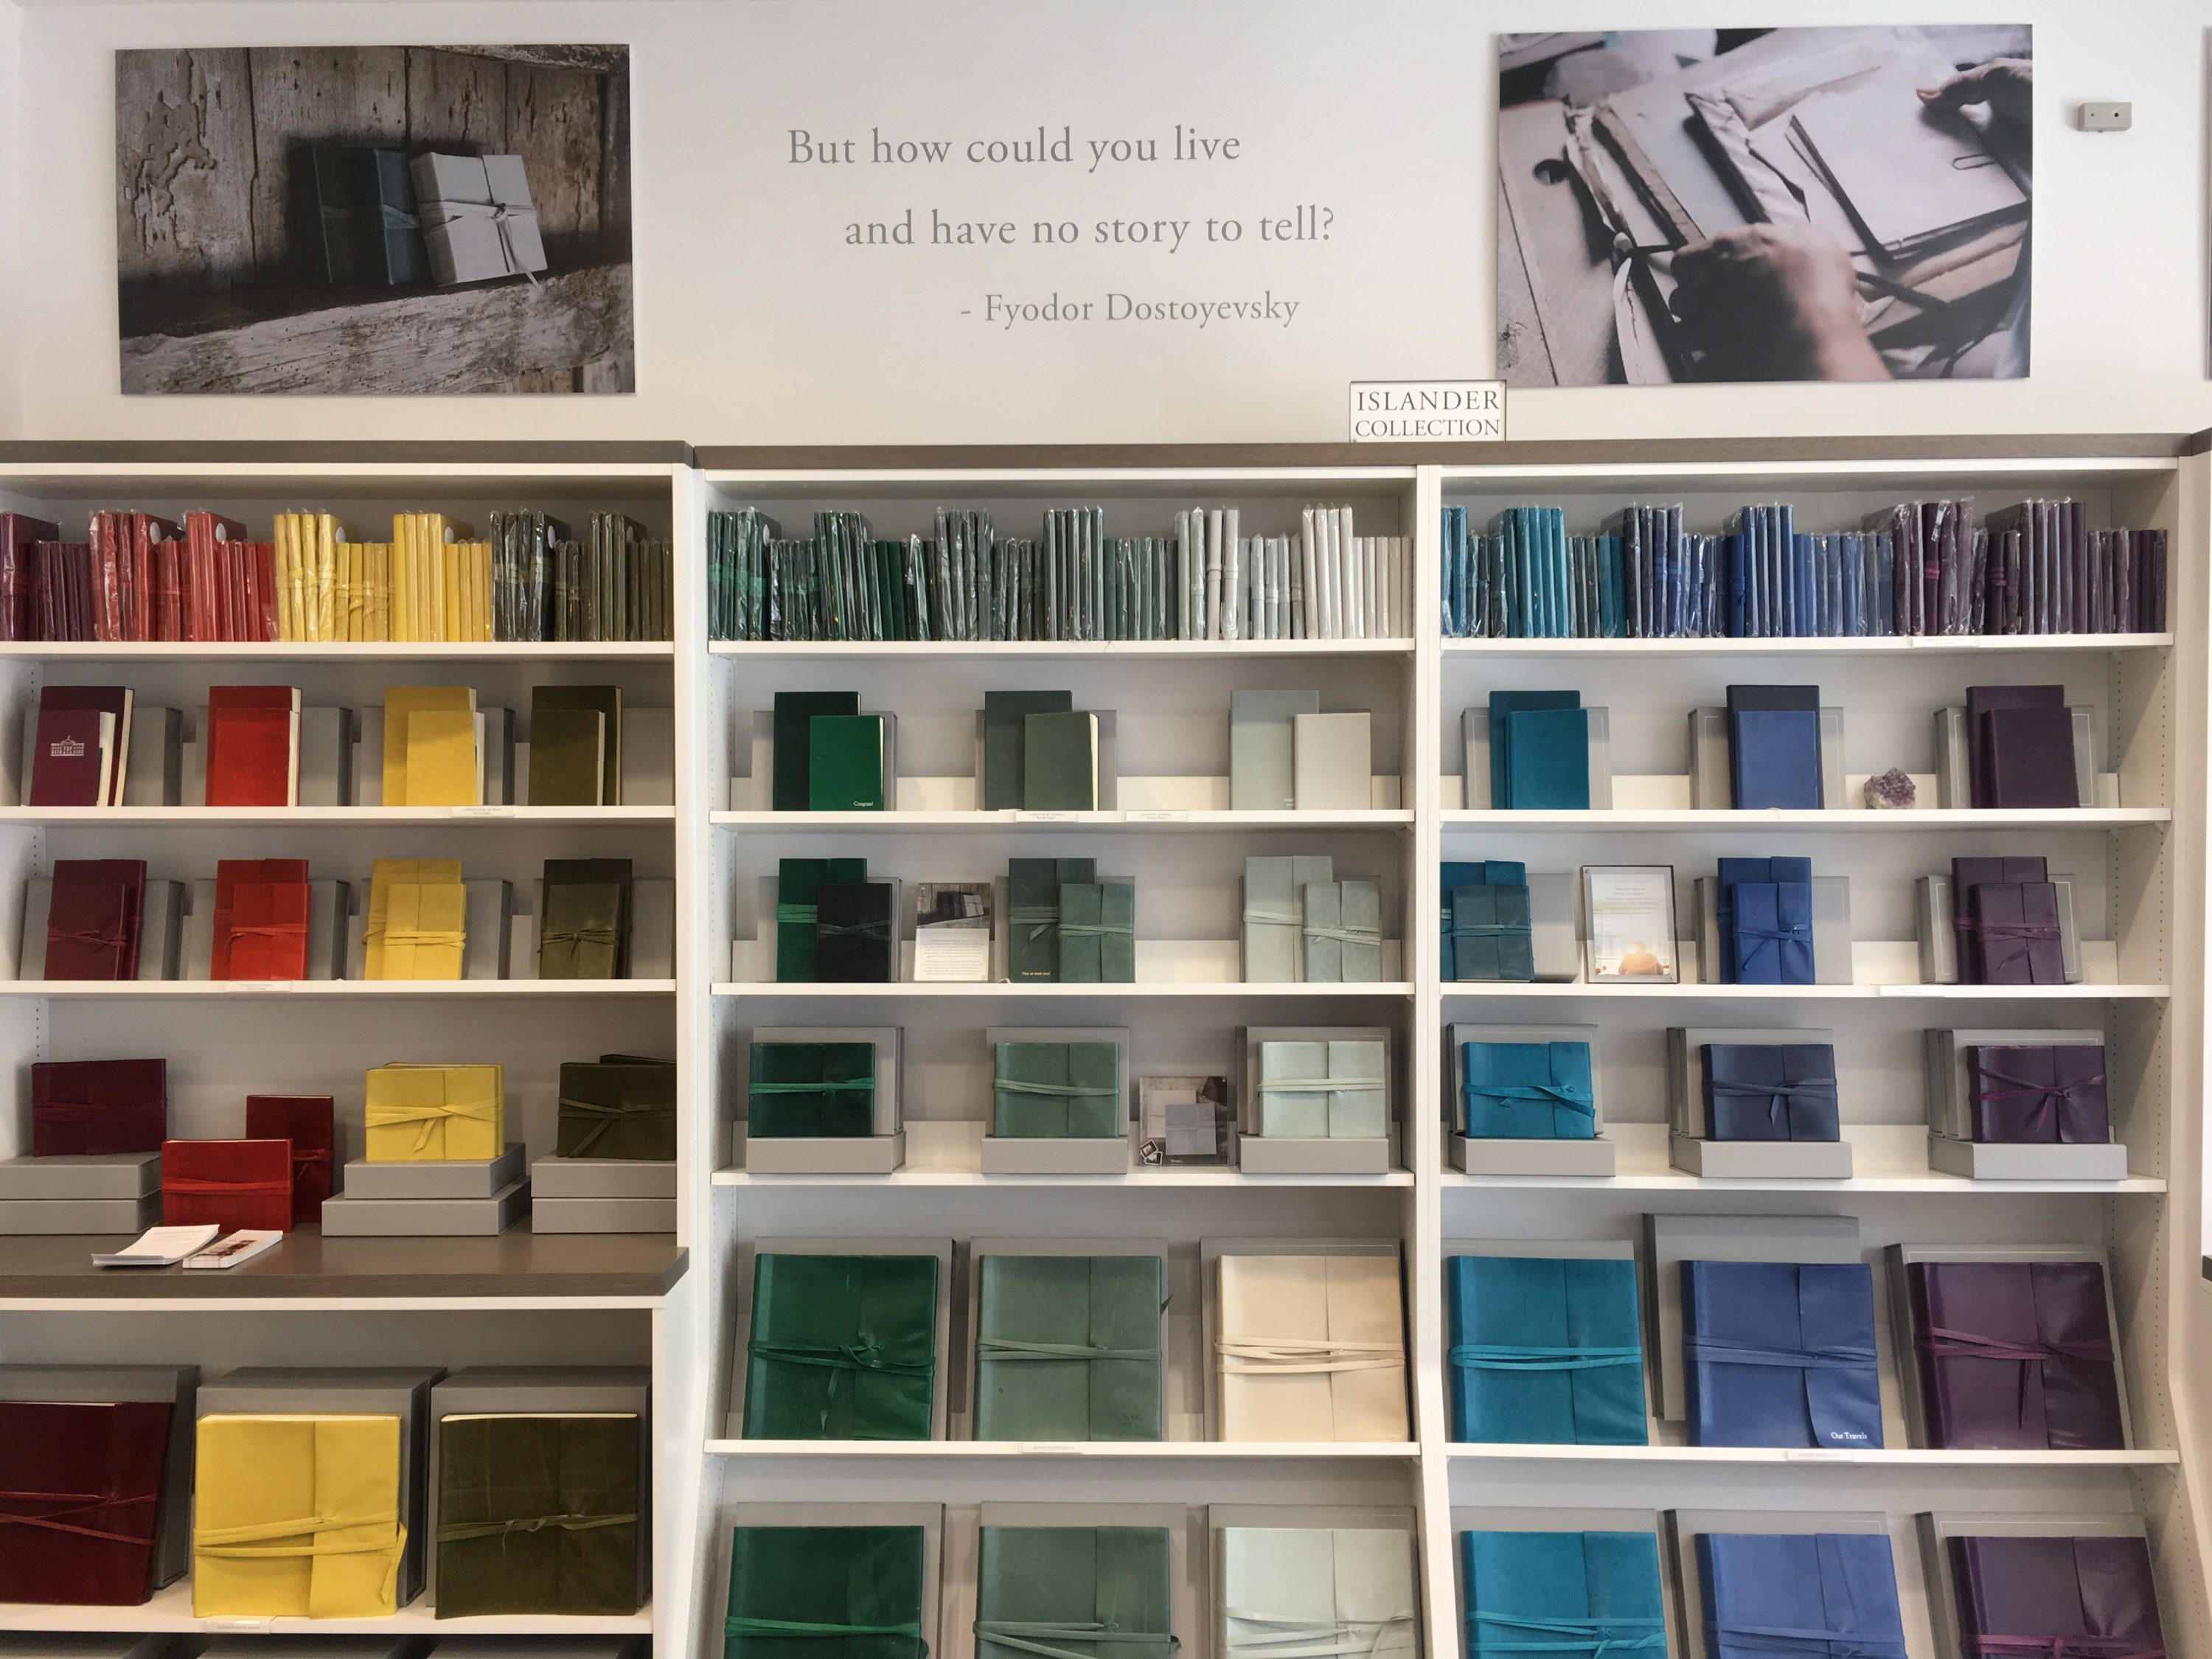 Jenni Bick Custom Journals, 25 Years After closing her independent bookstore in adam's morgan, Jenni Bick is opening up a paper goods emporium in Dupont